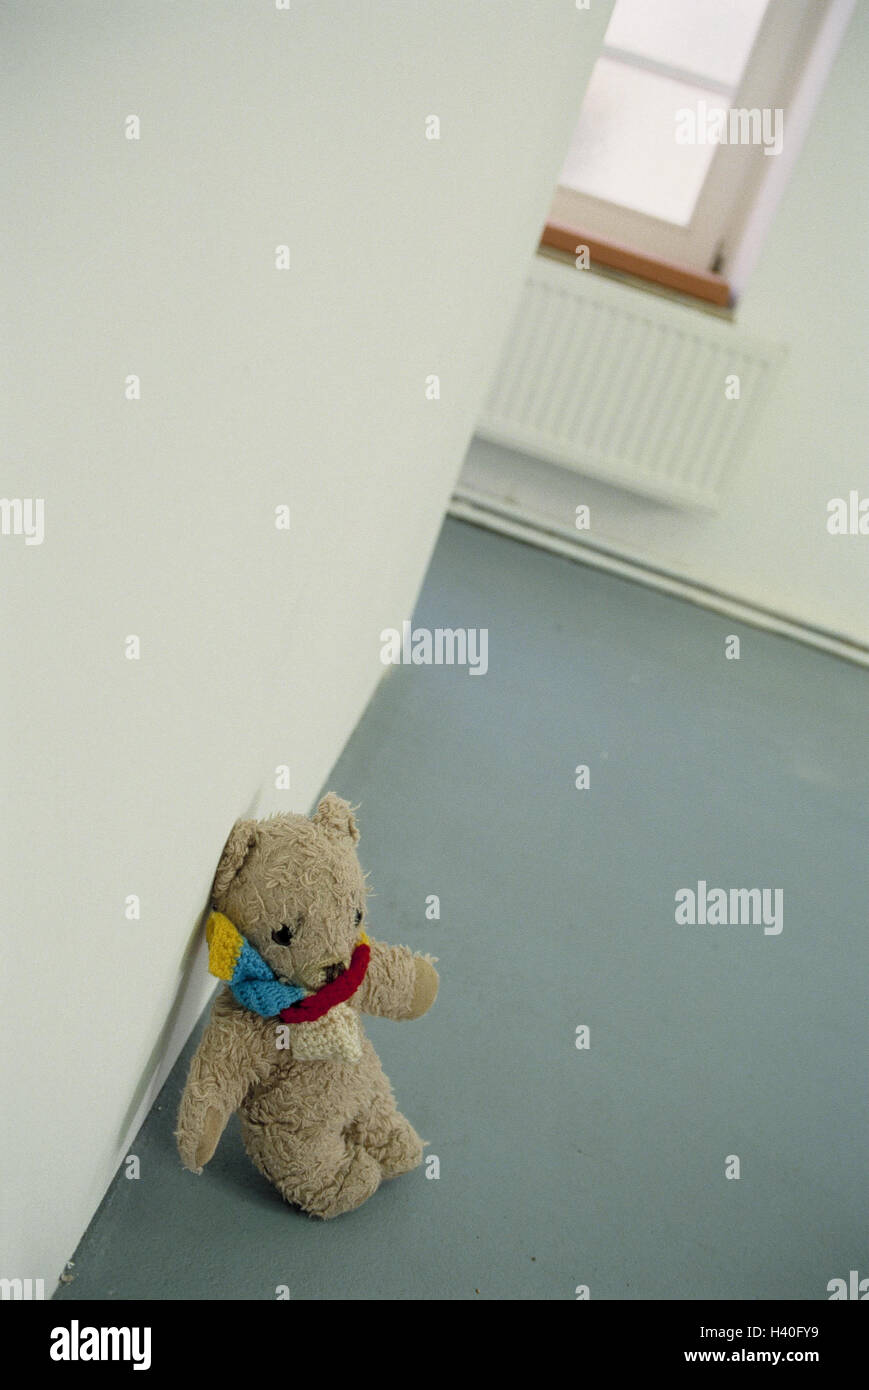 Flat, blank, detail, teddy bear, Still life, product photography, childhood, toys, soft toy, soft toy, Teddy, soft animal, loneliness, lonely, all alone, exit, desolation, forgotten, oblivion Stock Photo